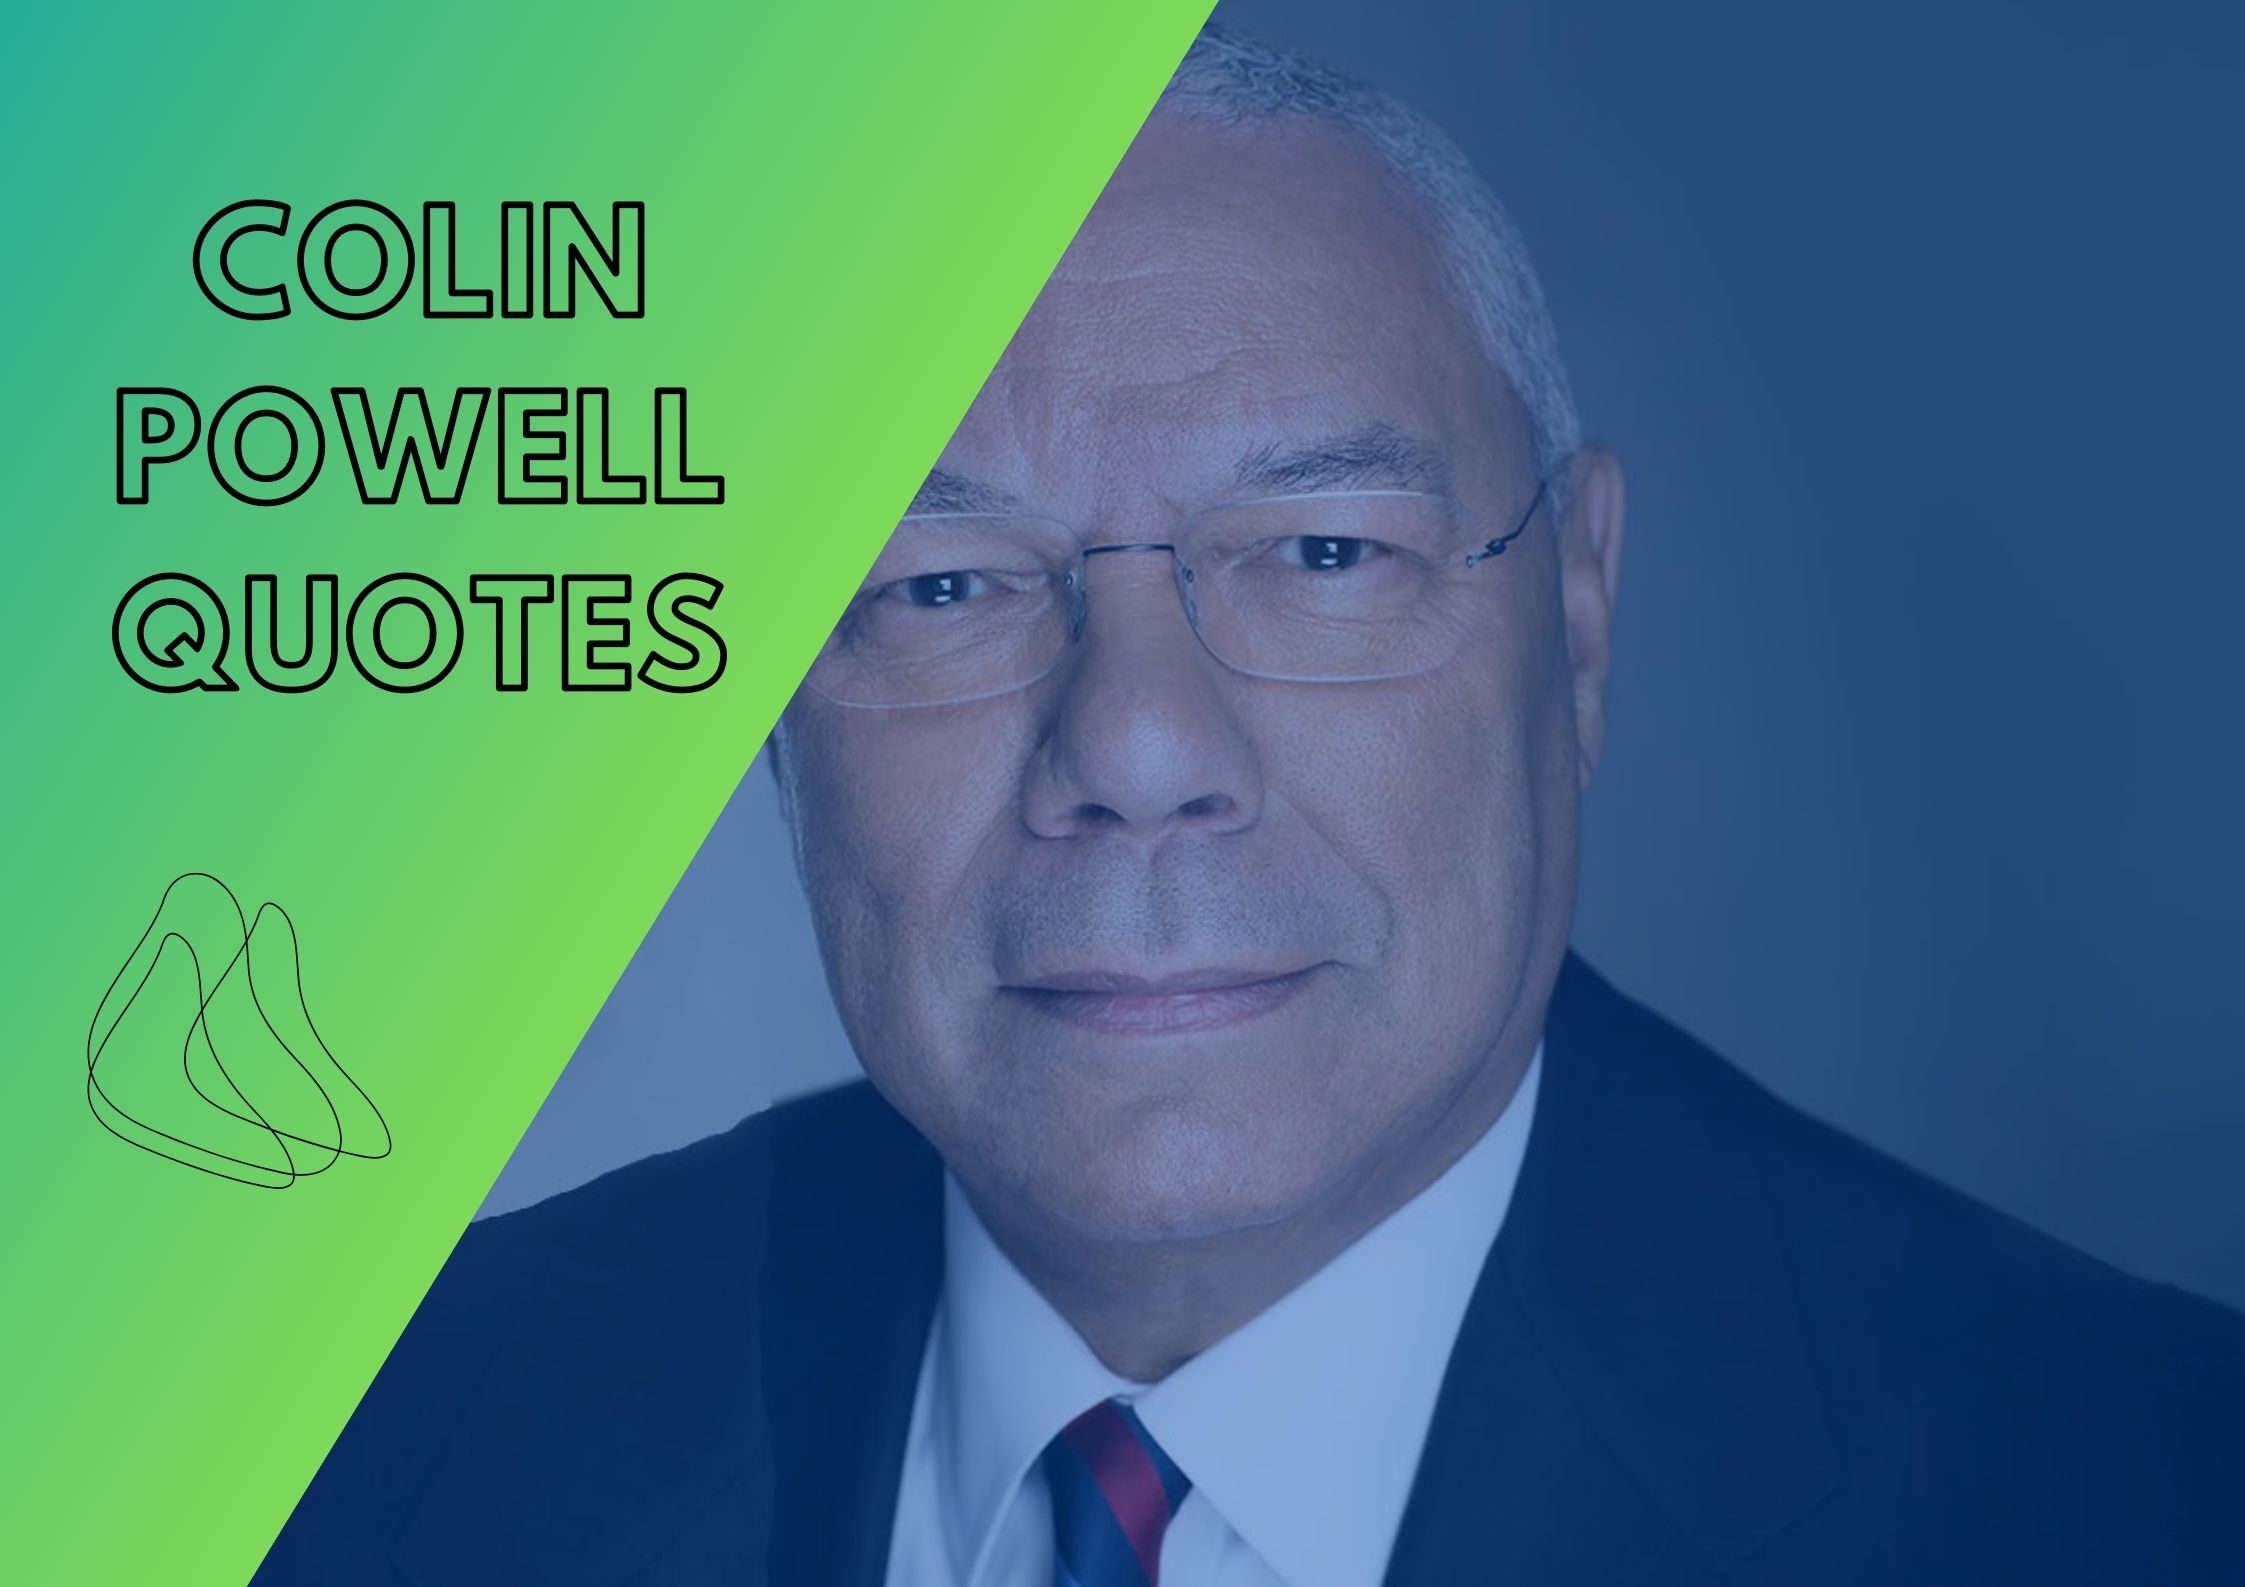 Best Colin Powell Quotes